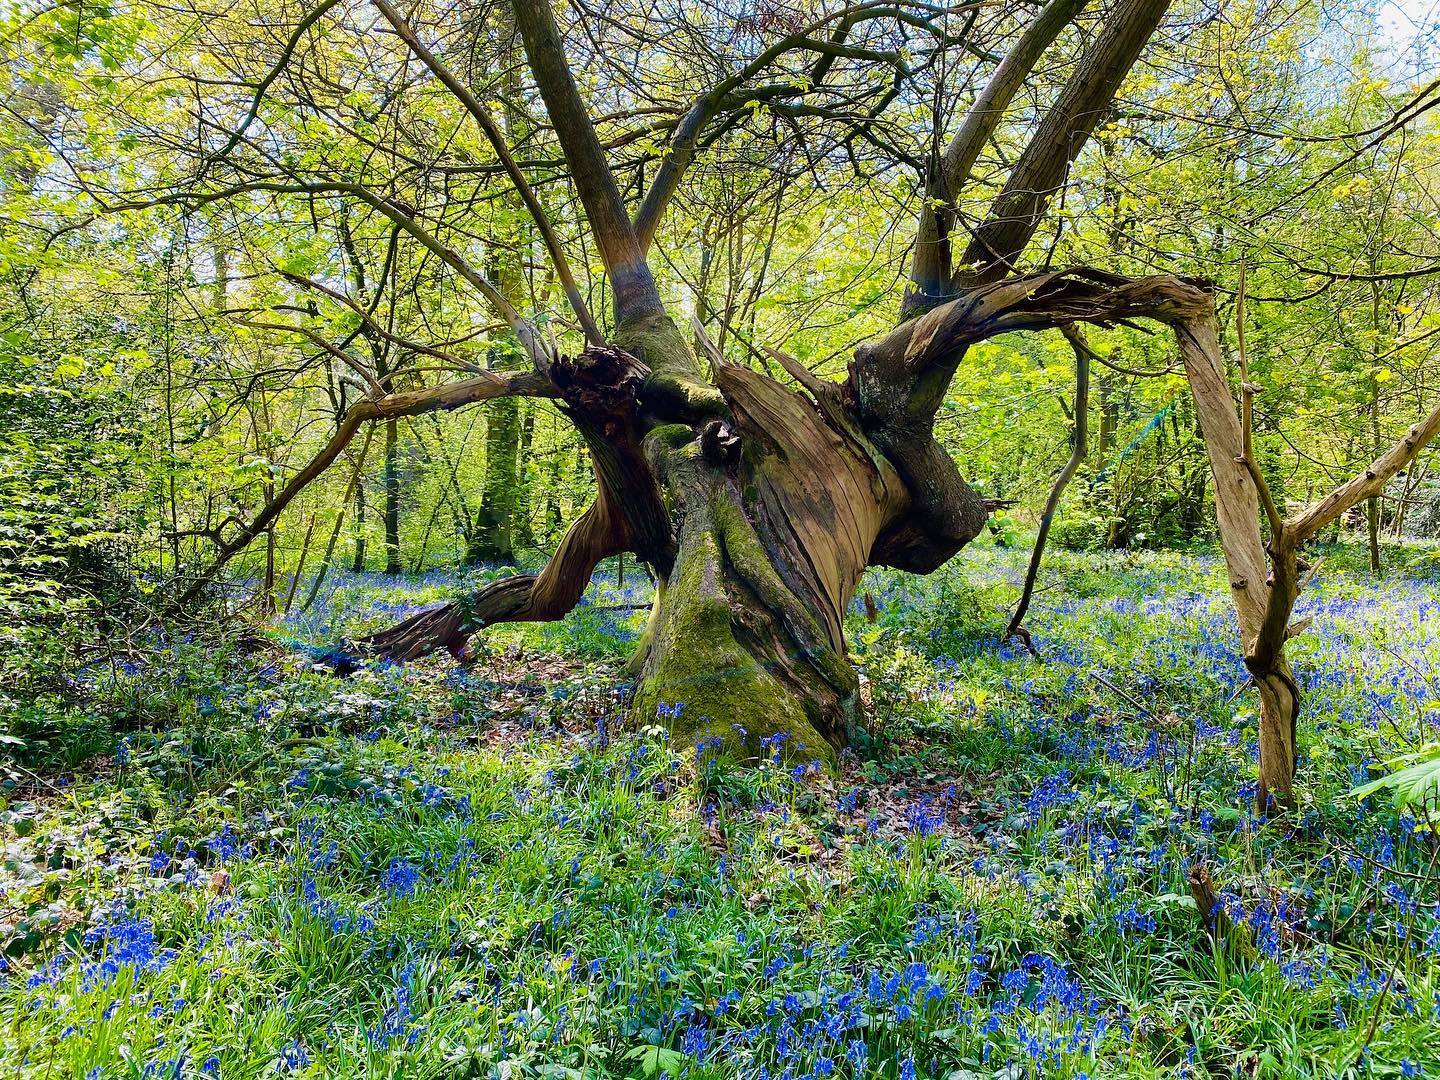 Bluebell wood at Combermere Abbey